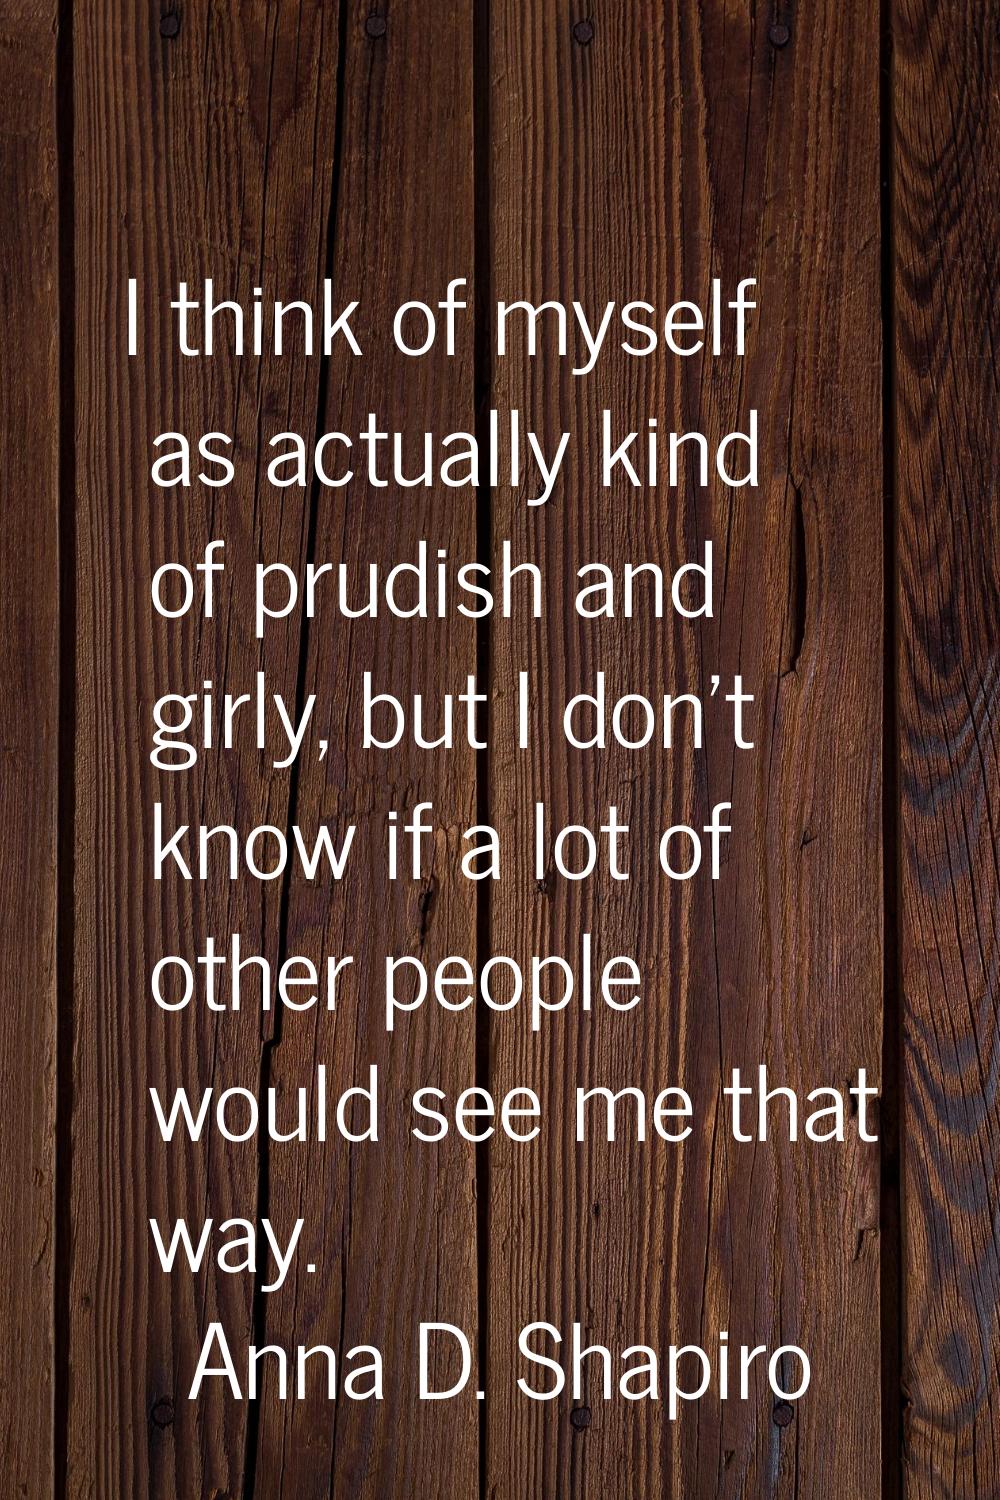 I think of myself as actually kind of prudish and girly, but I don't know if a lot of other people 